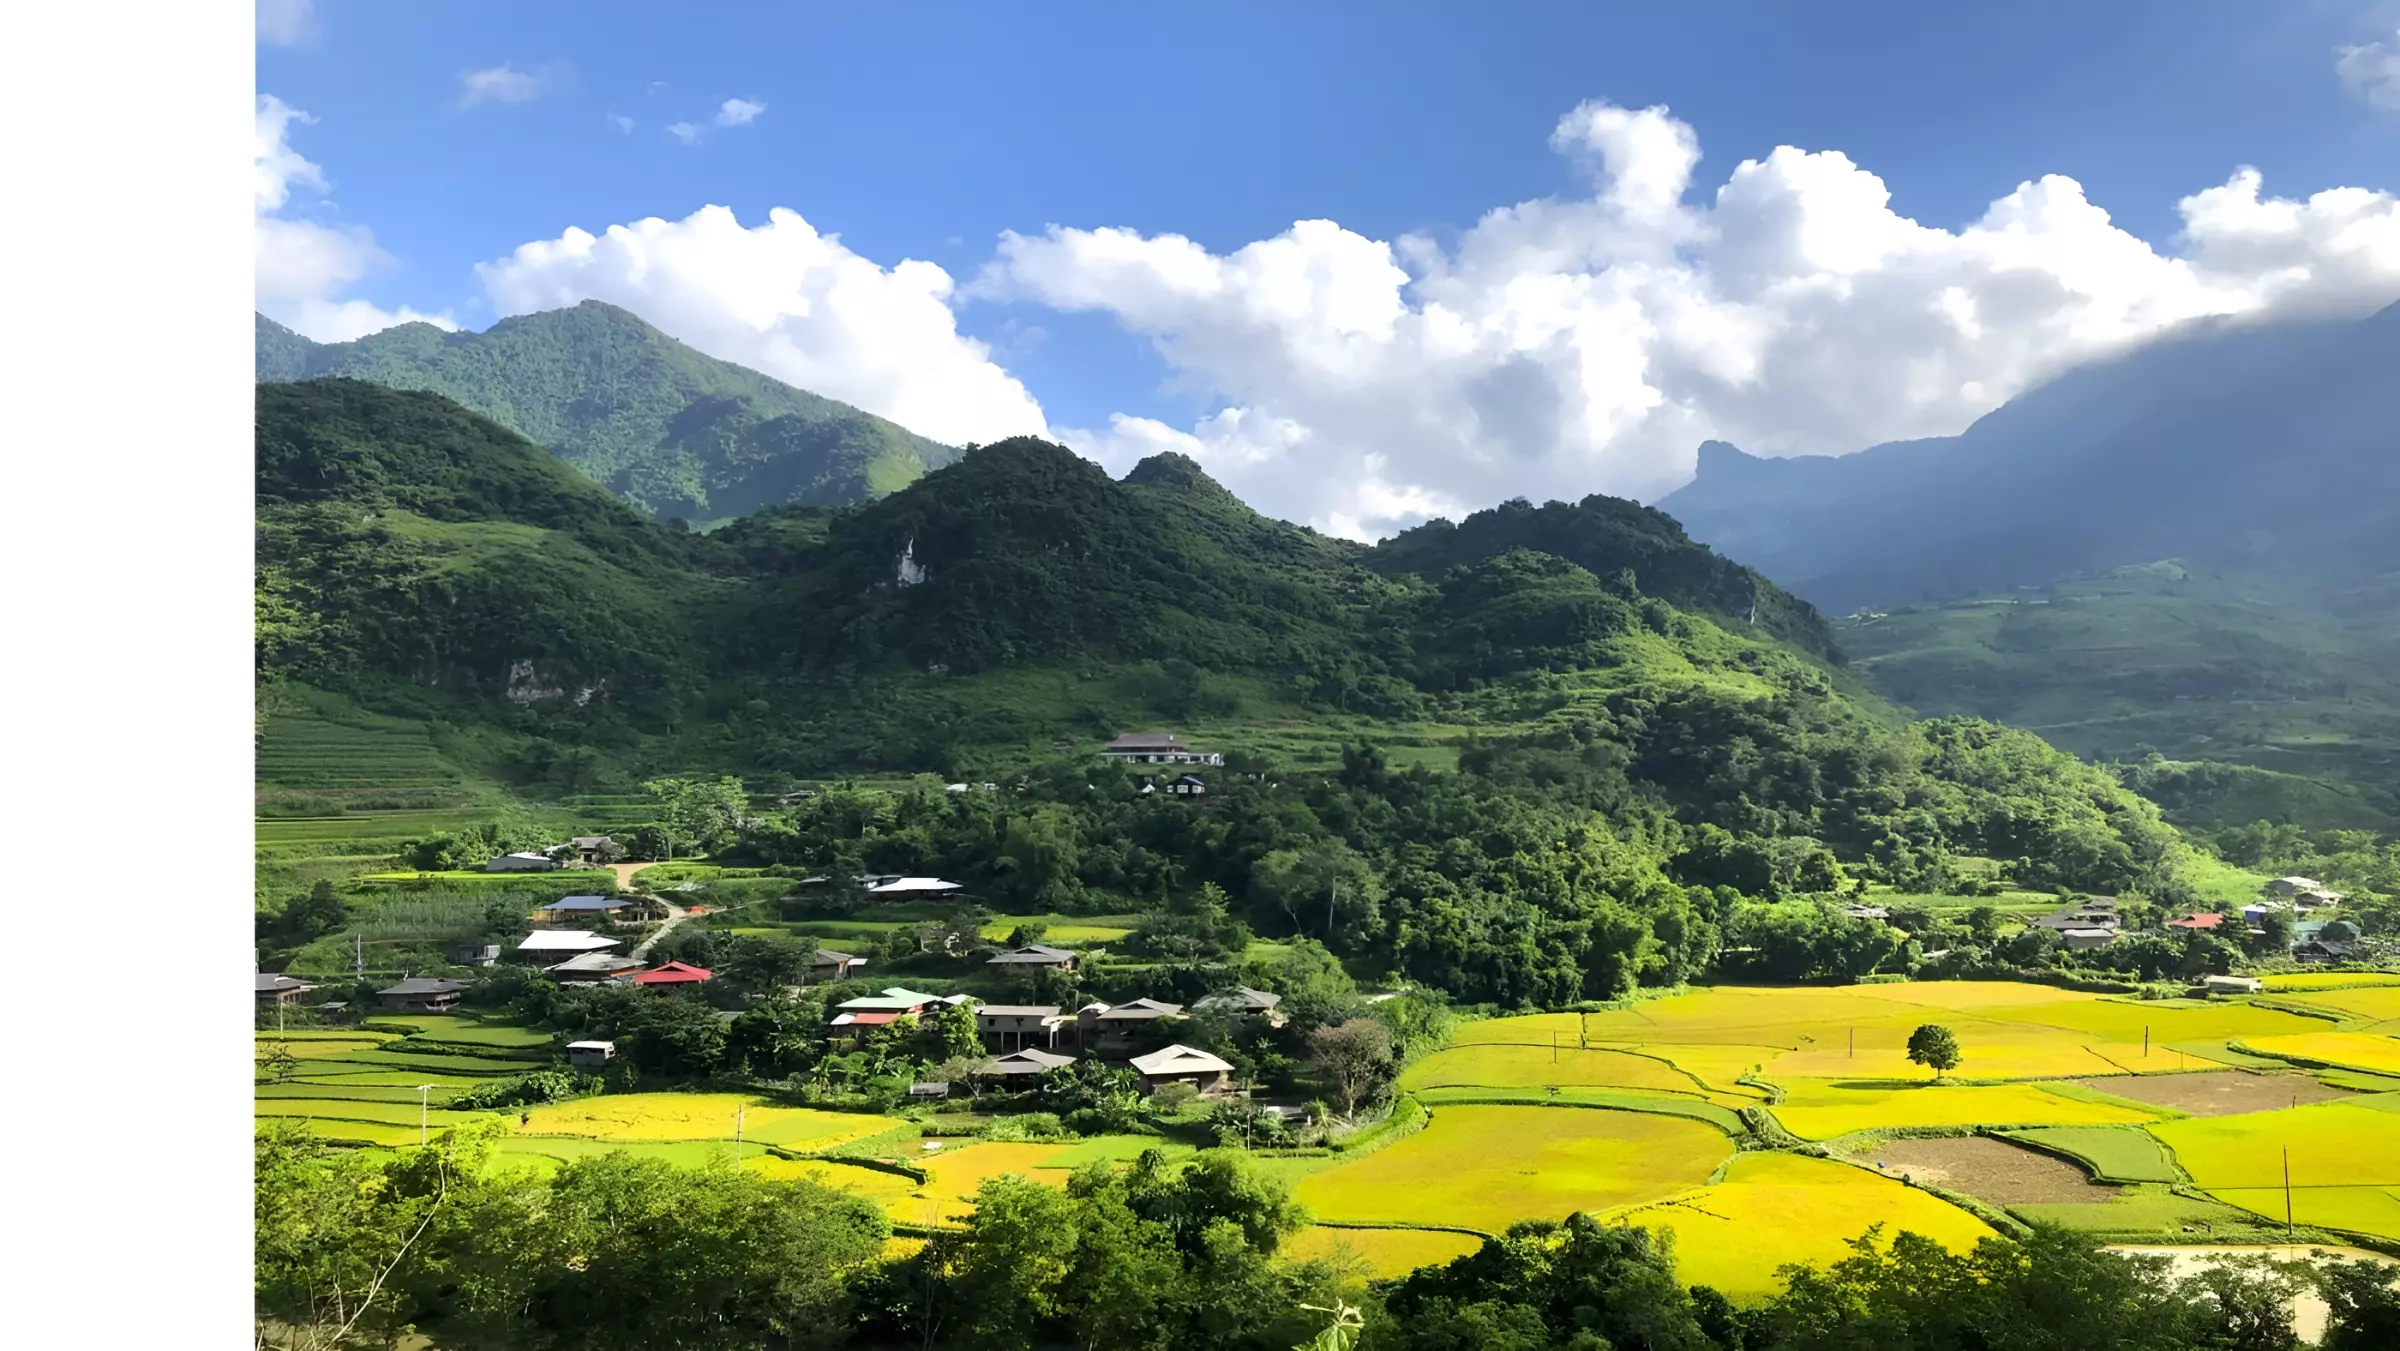 Ha Giang is known by many people for its wild and majestic natural beauty